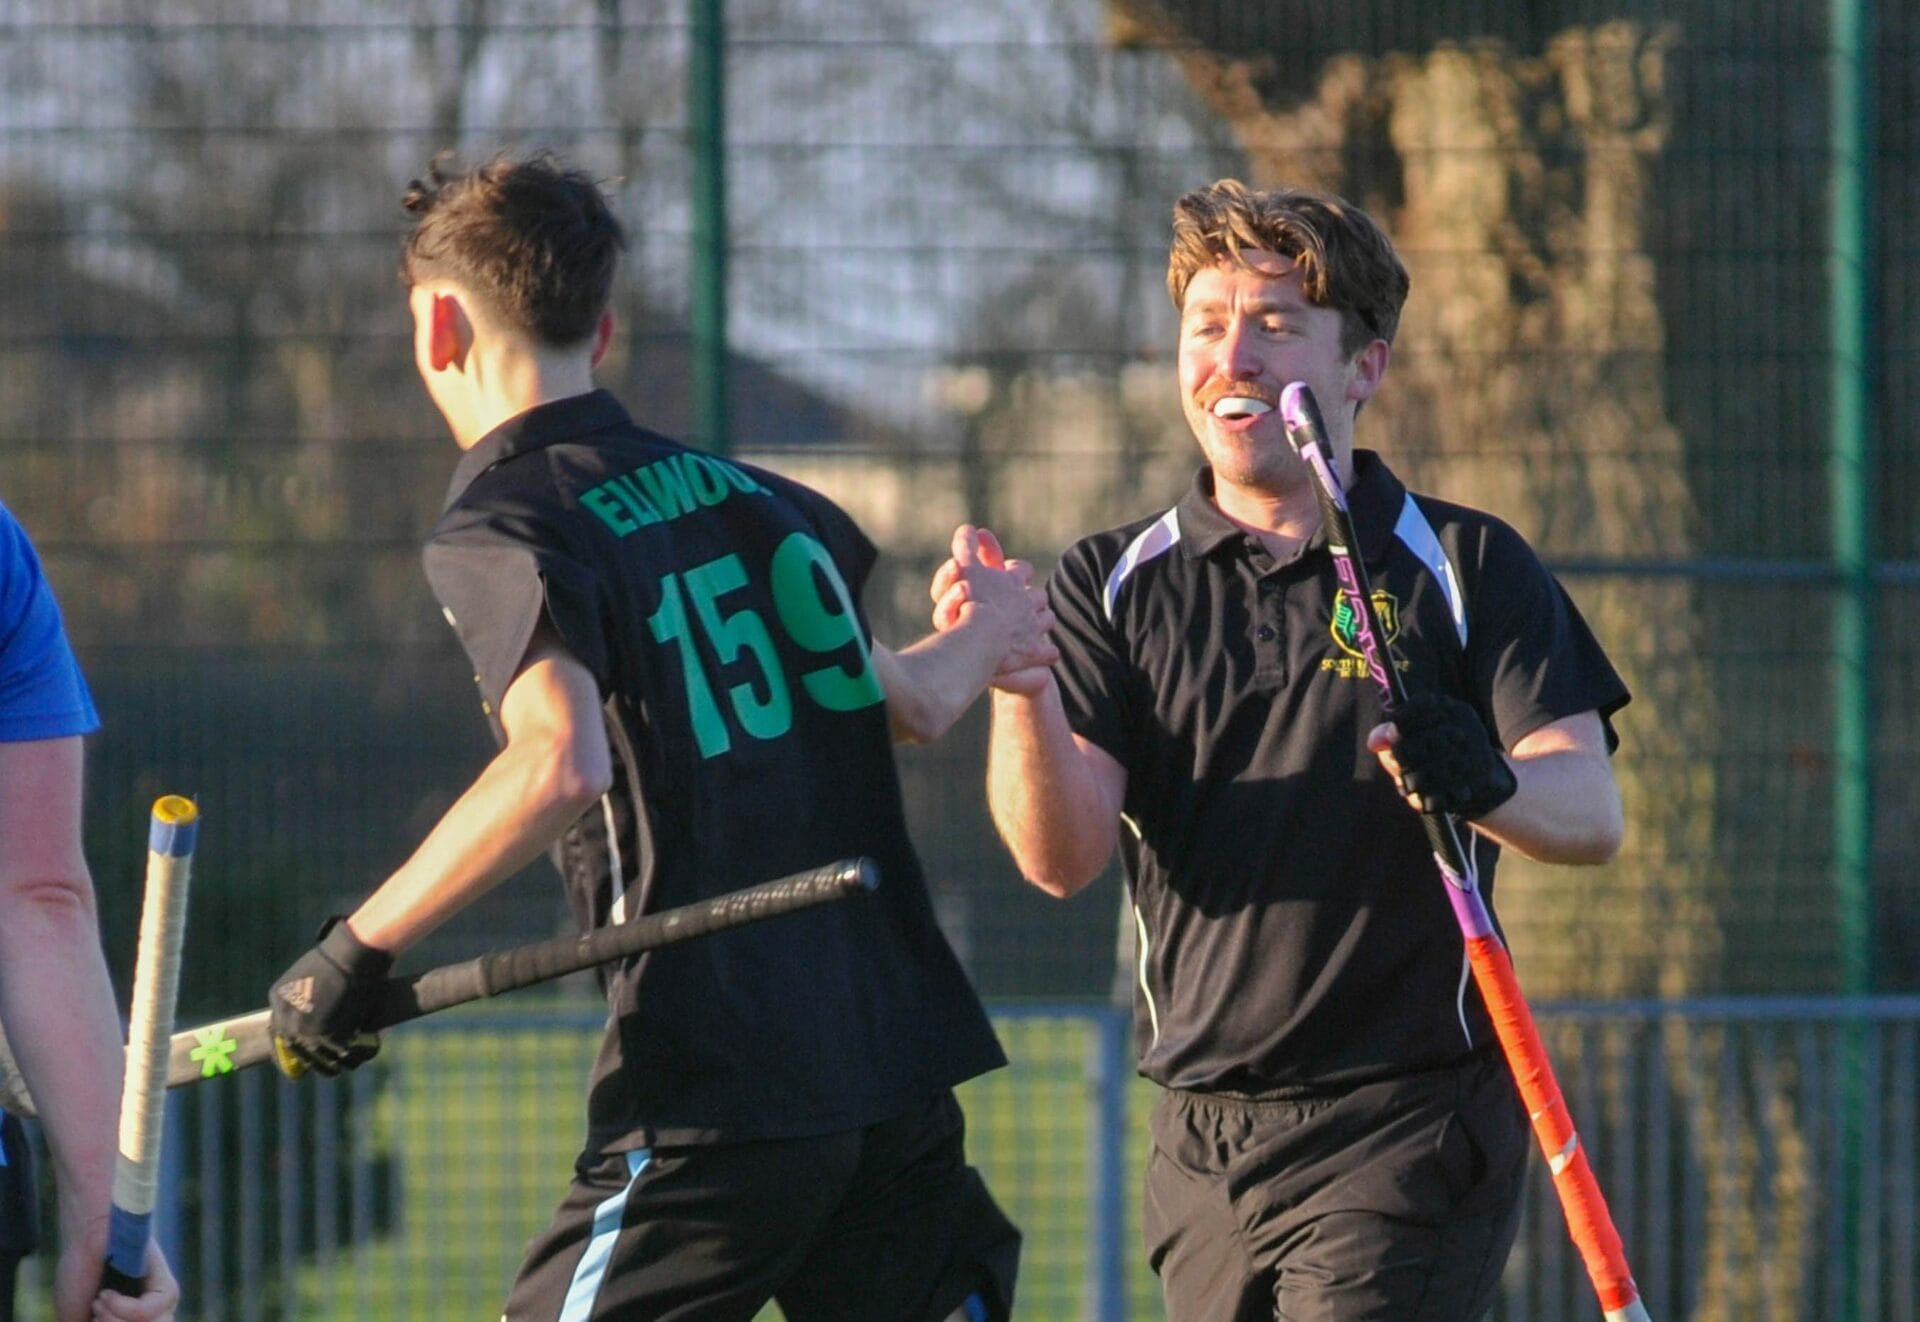 South Berkshire 3s make winning return to action – Reading Today Online